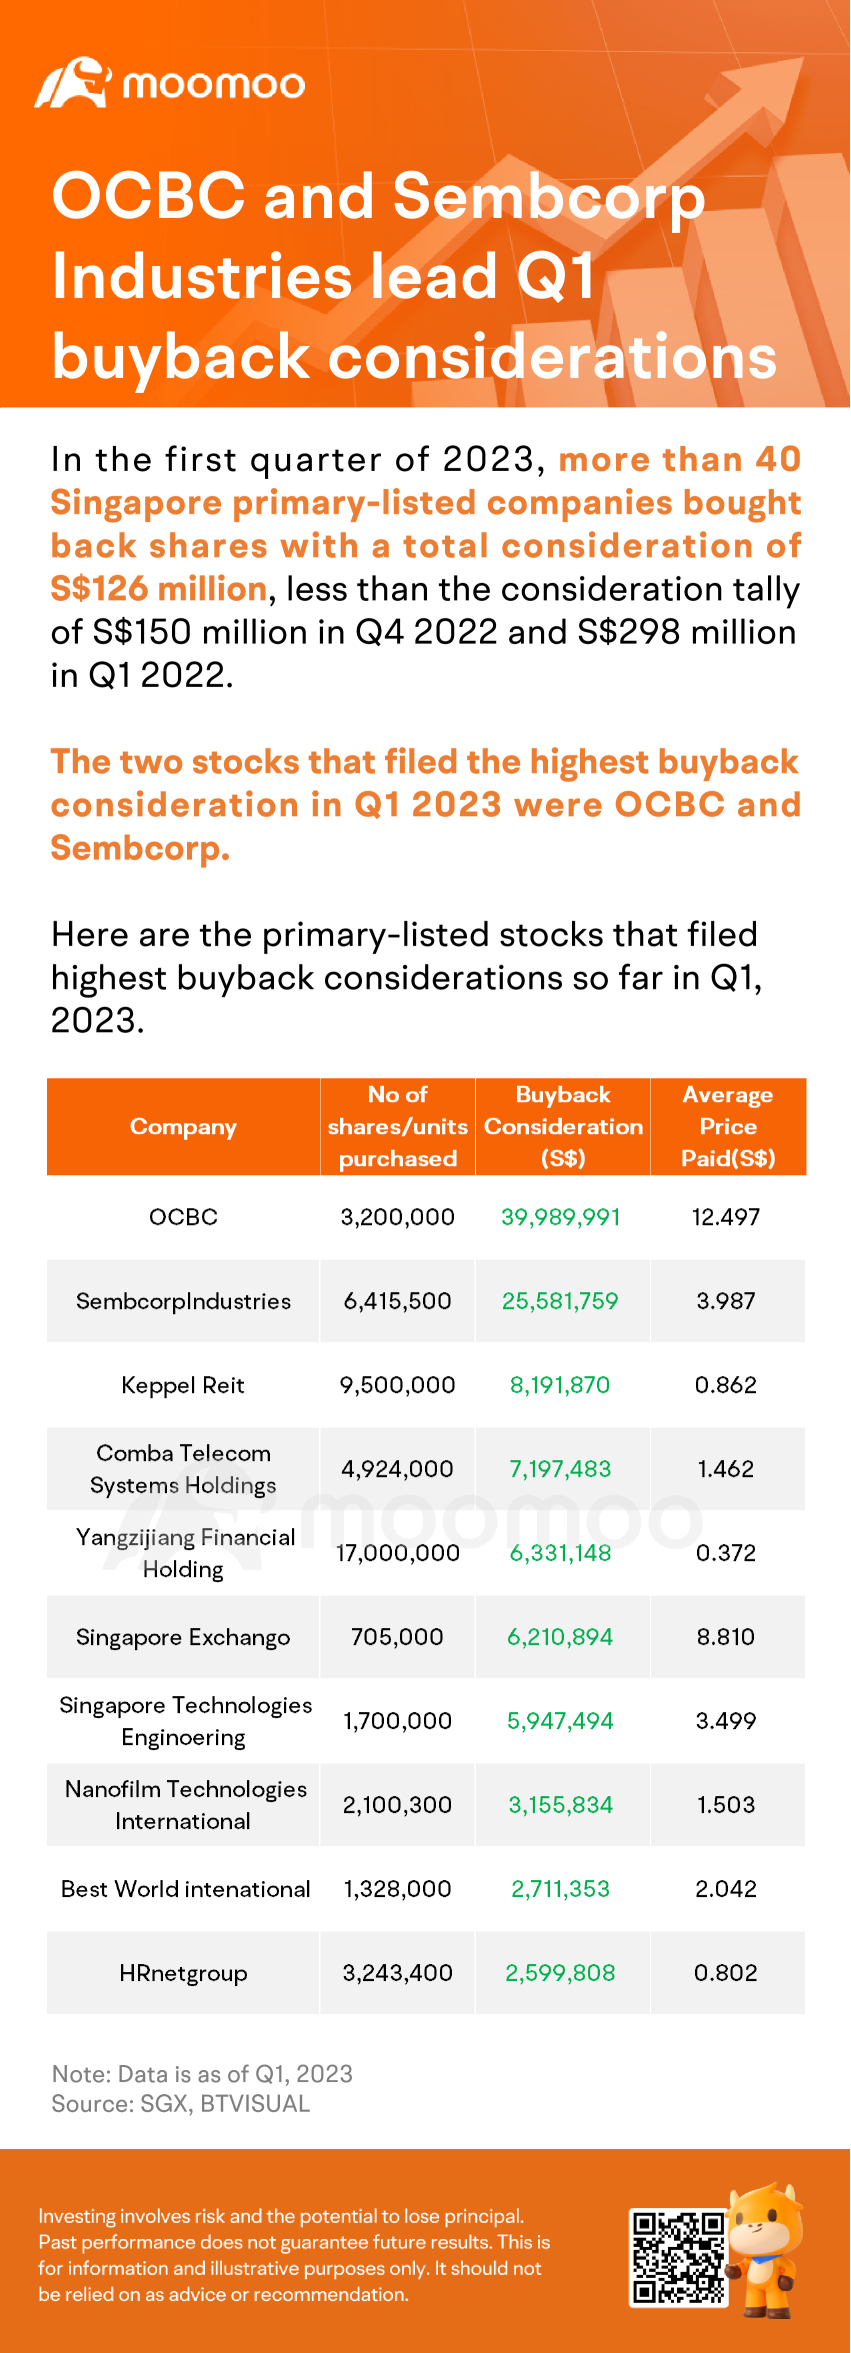 OCBC and Sembcorp Industries lead Q1 buyback considerations